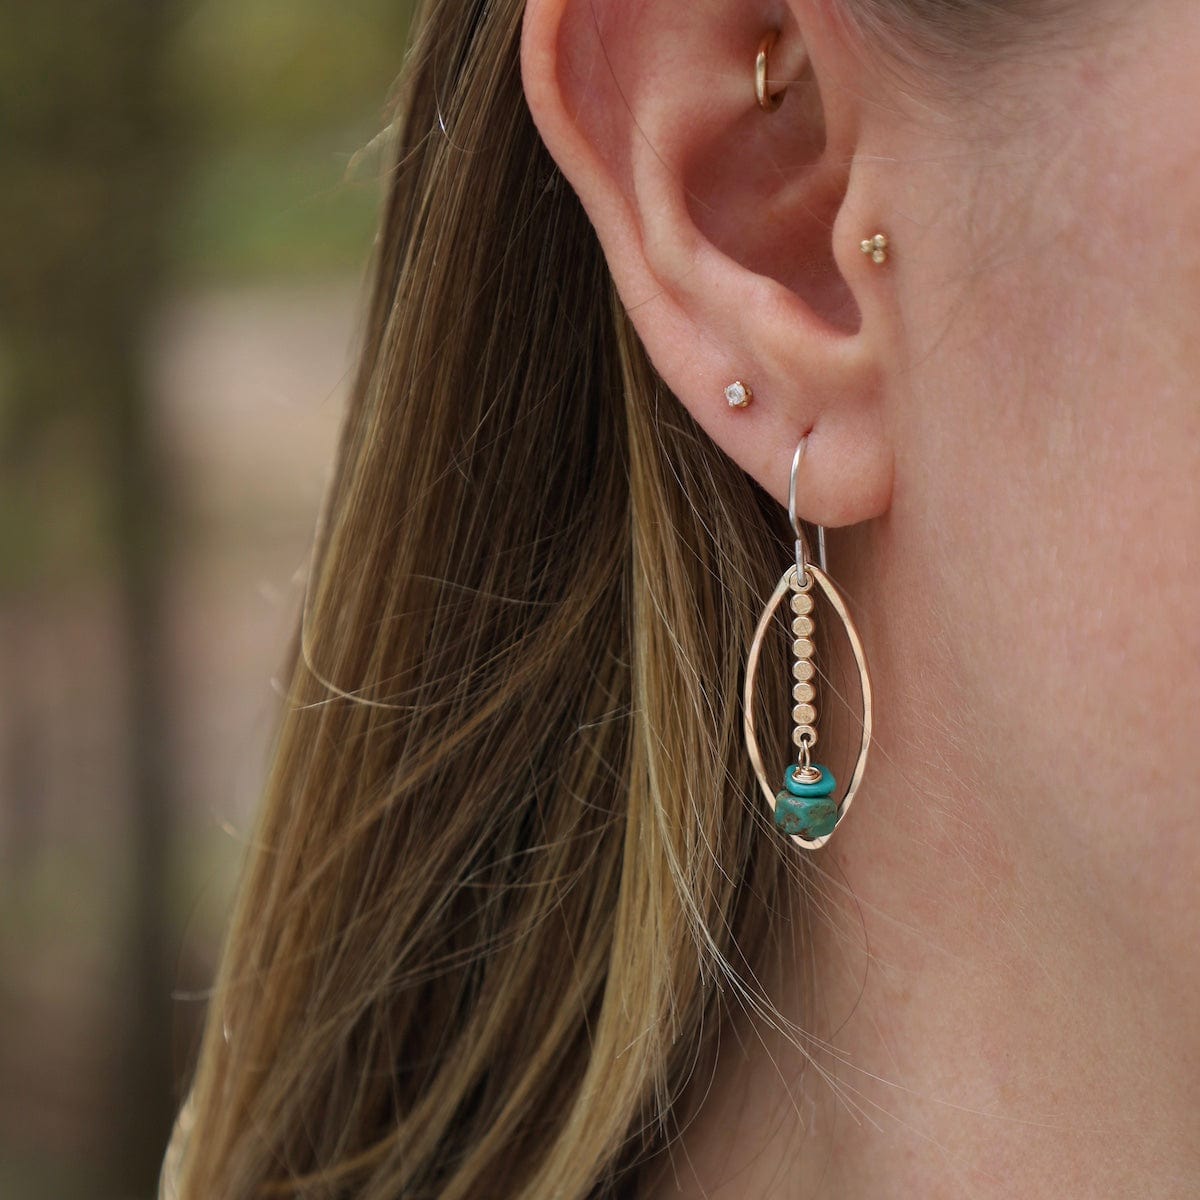 EAR-GF Marquise Frame with Turquoise Drop Earrings